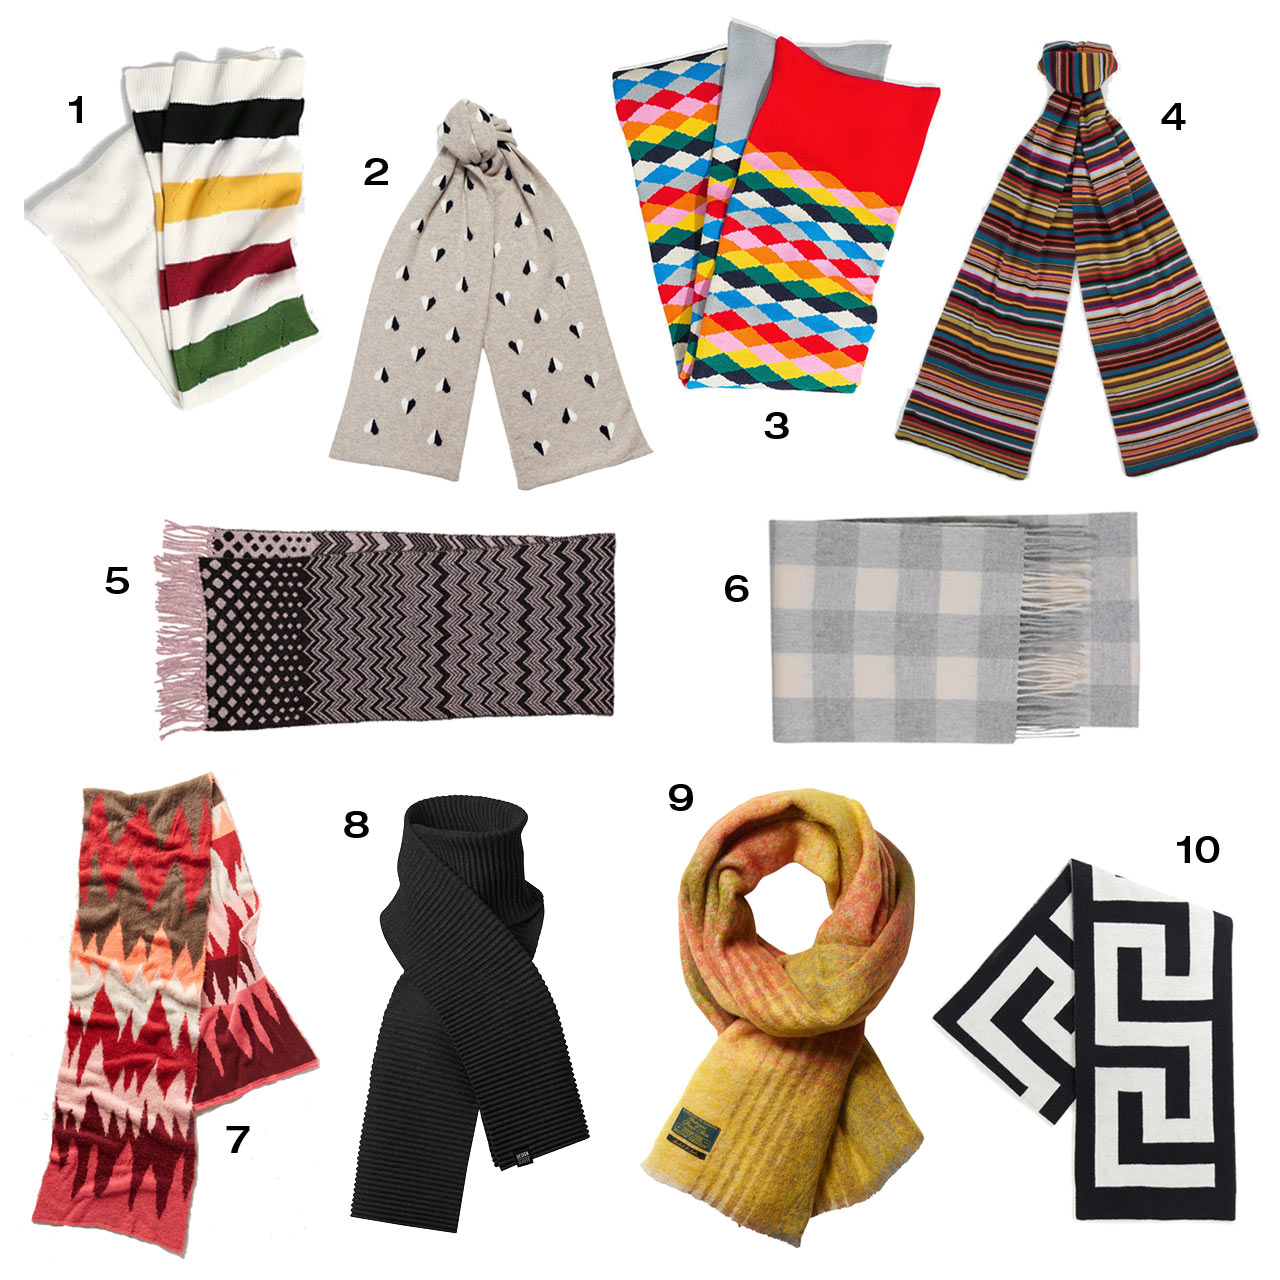 10 Modern Scarves to Keep You Warm